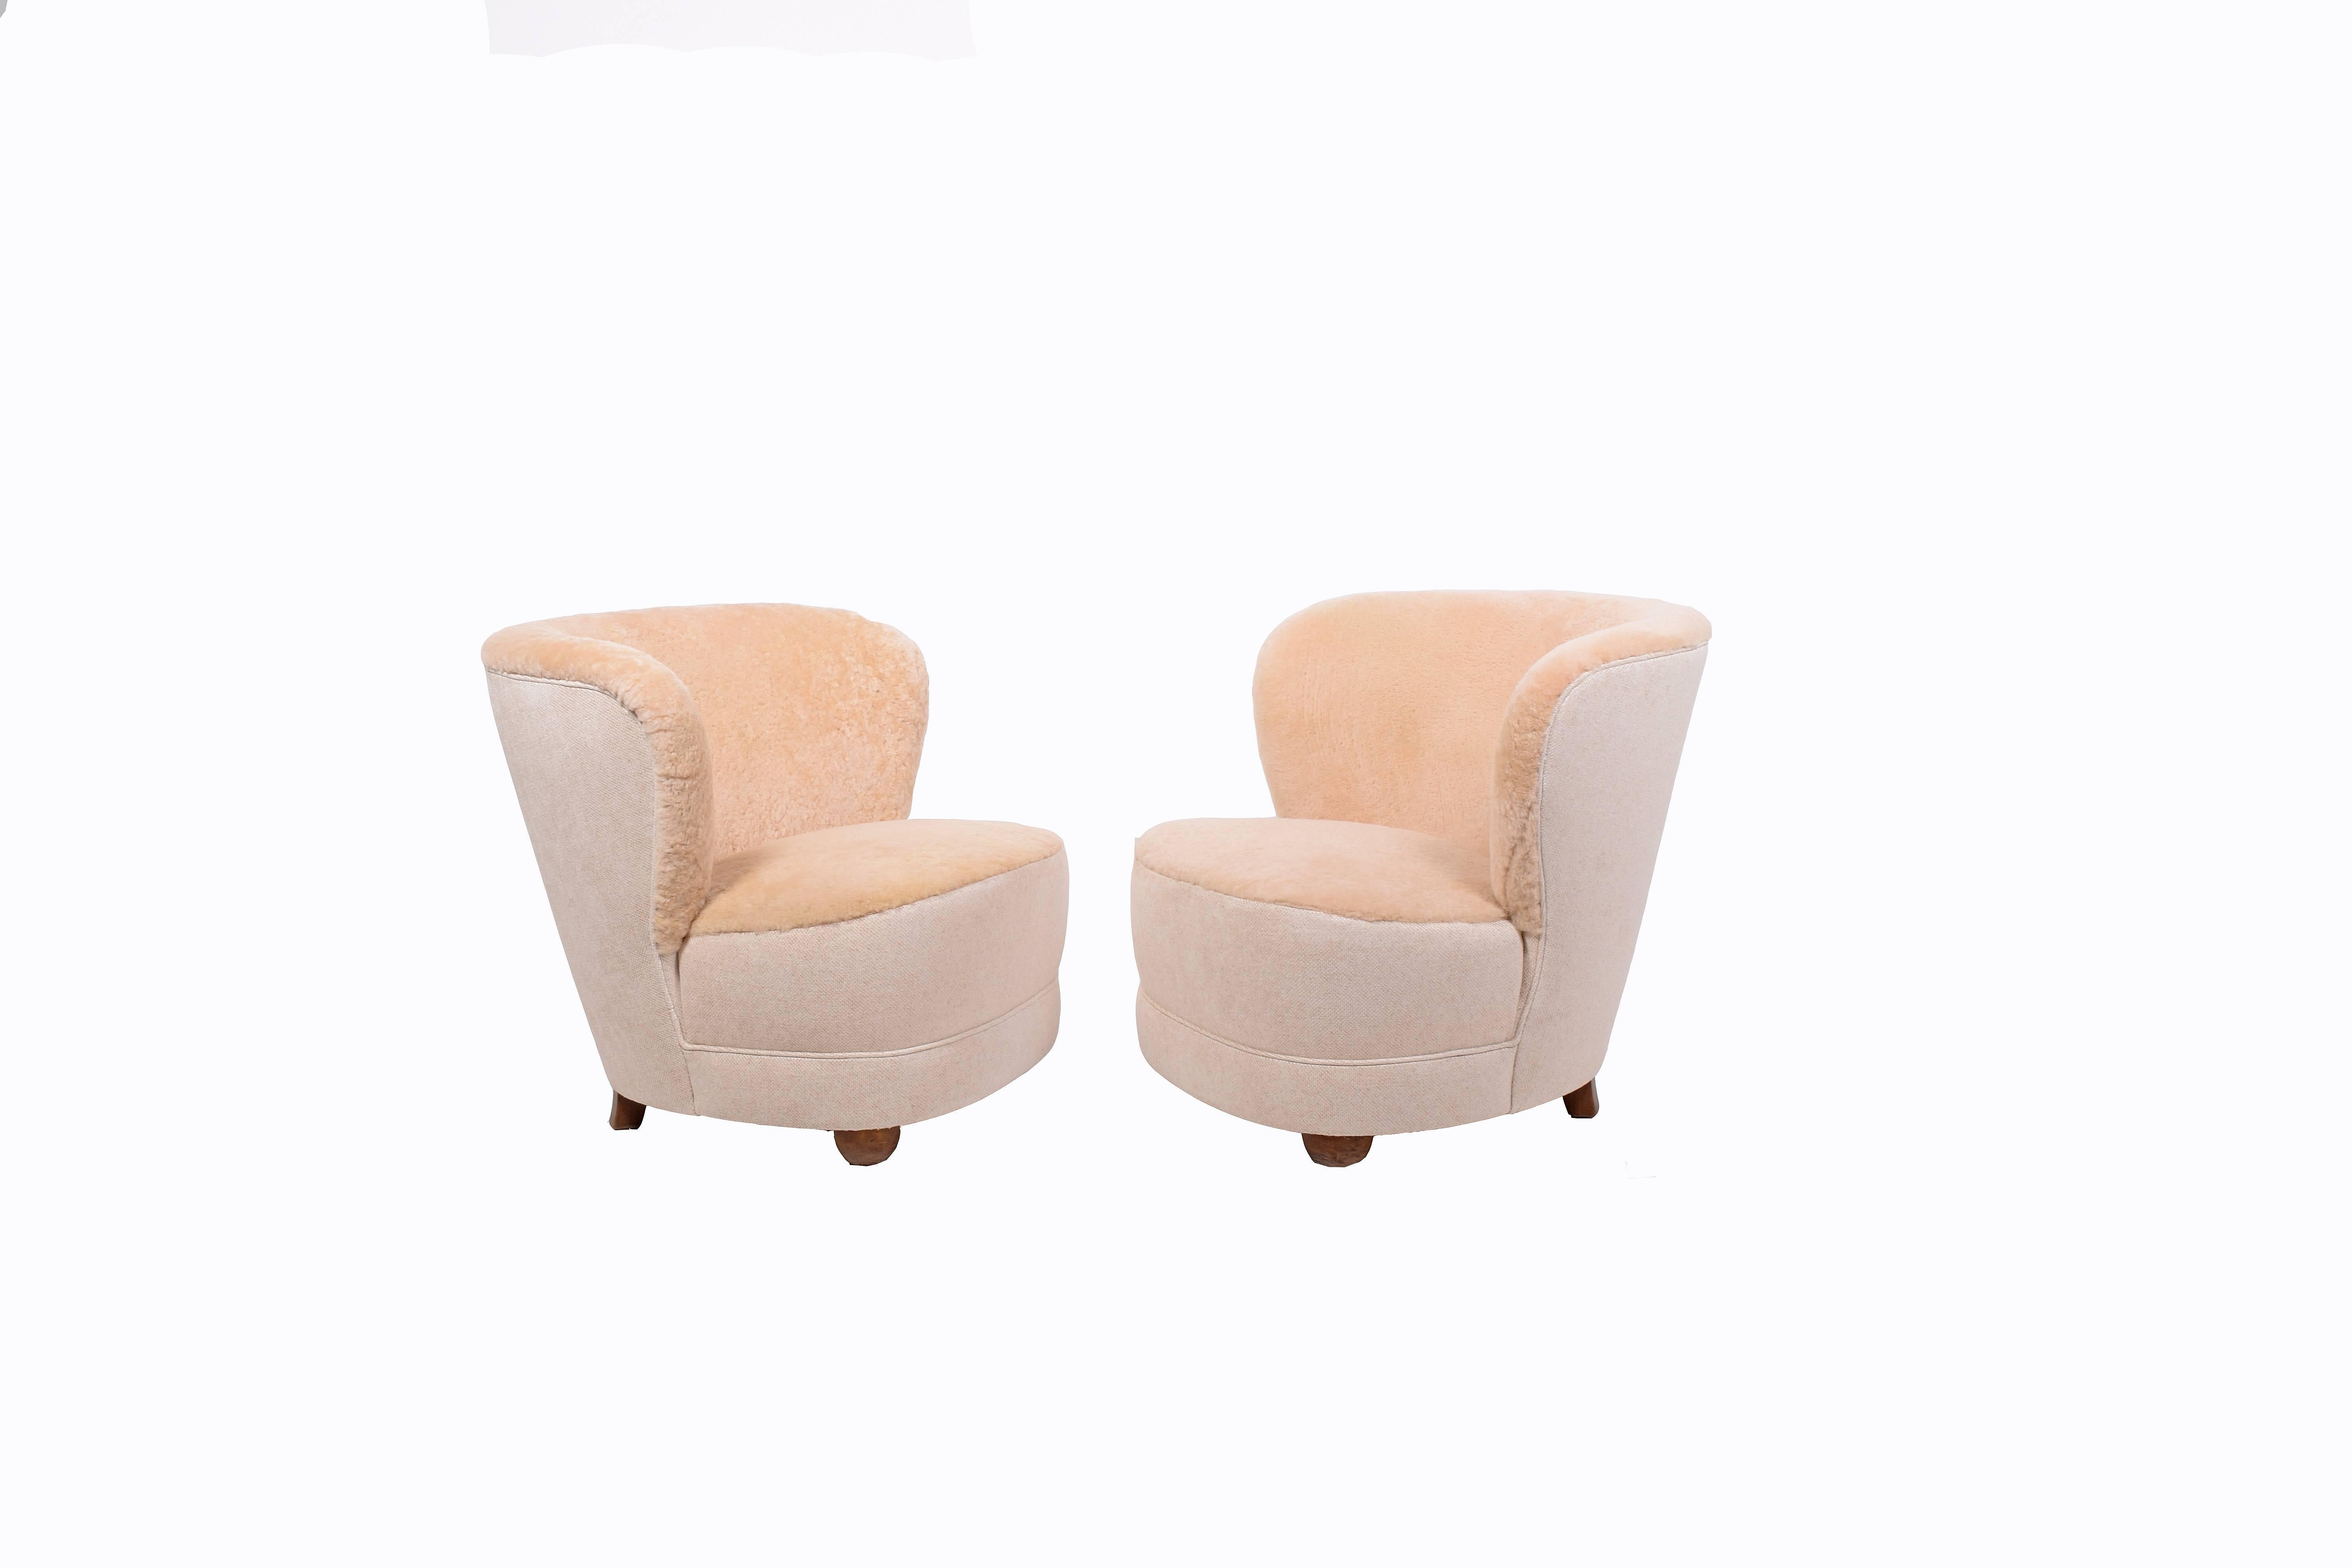 Pair of Danish 1940s stylish slipper chairs attributed to Flemming Lassen. Inside upholstered with sheep skin, outside upholstered white fabric.